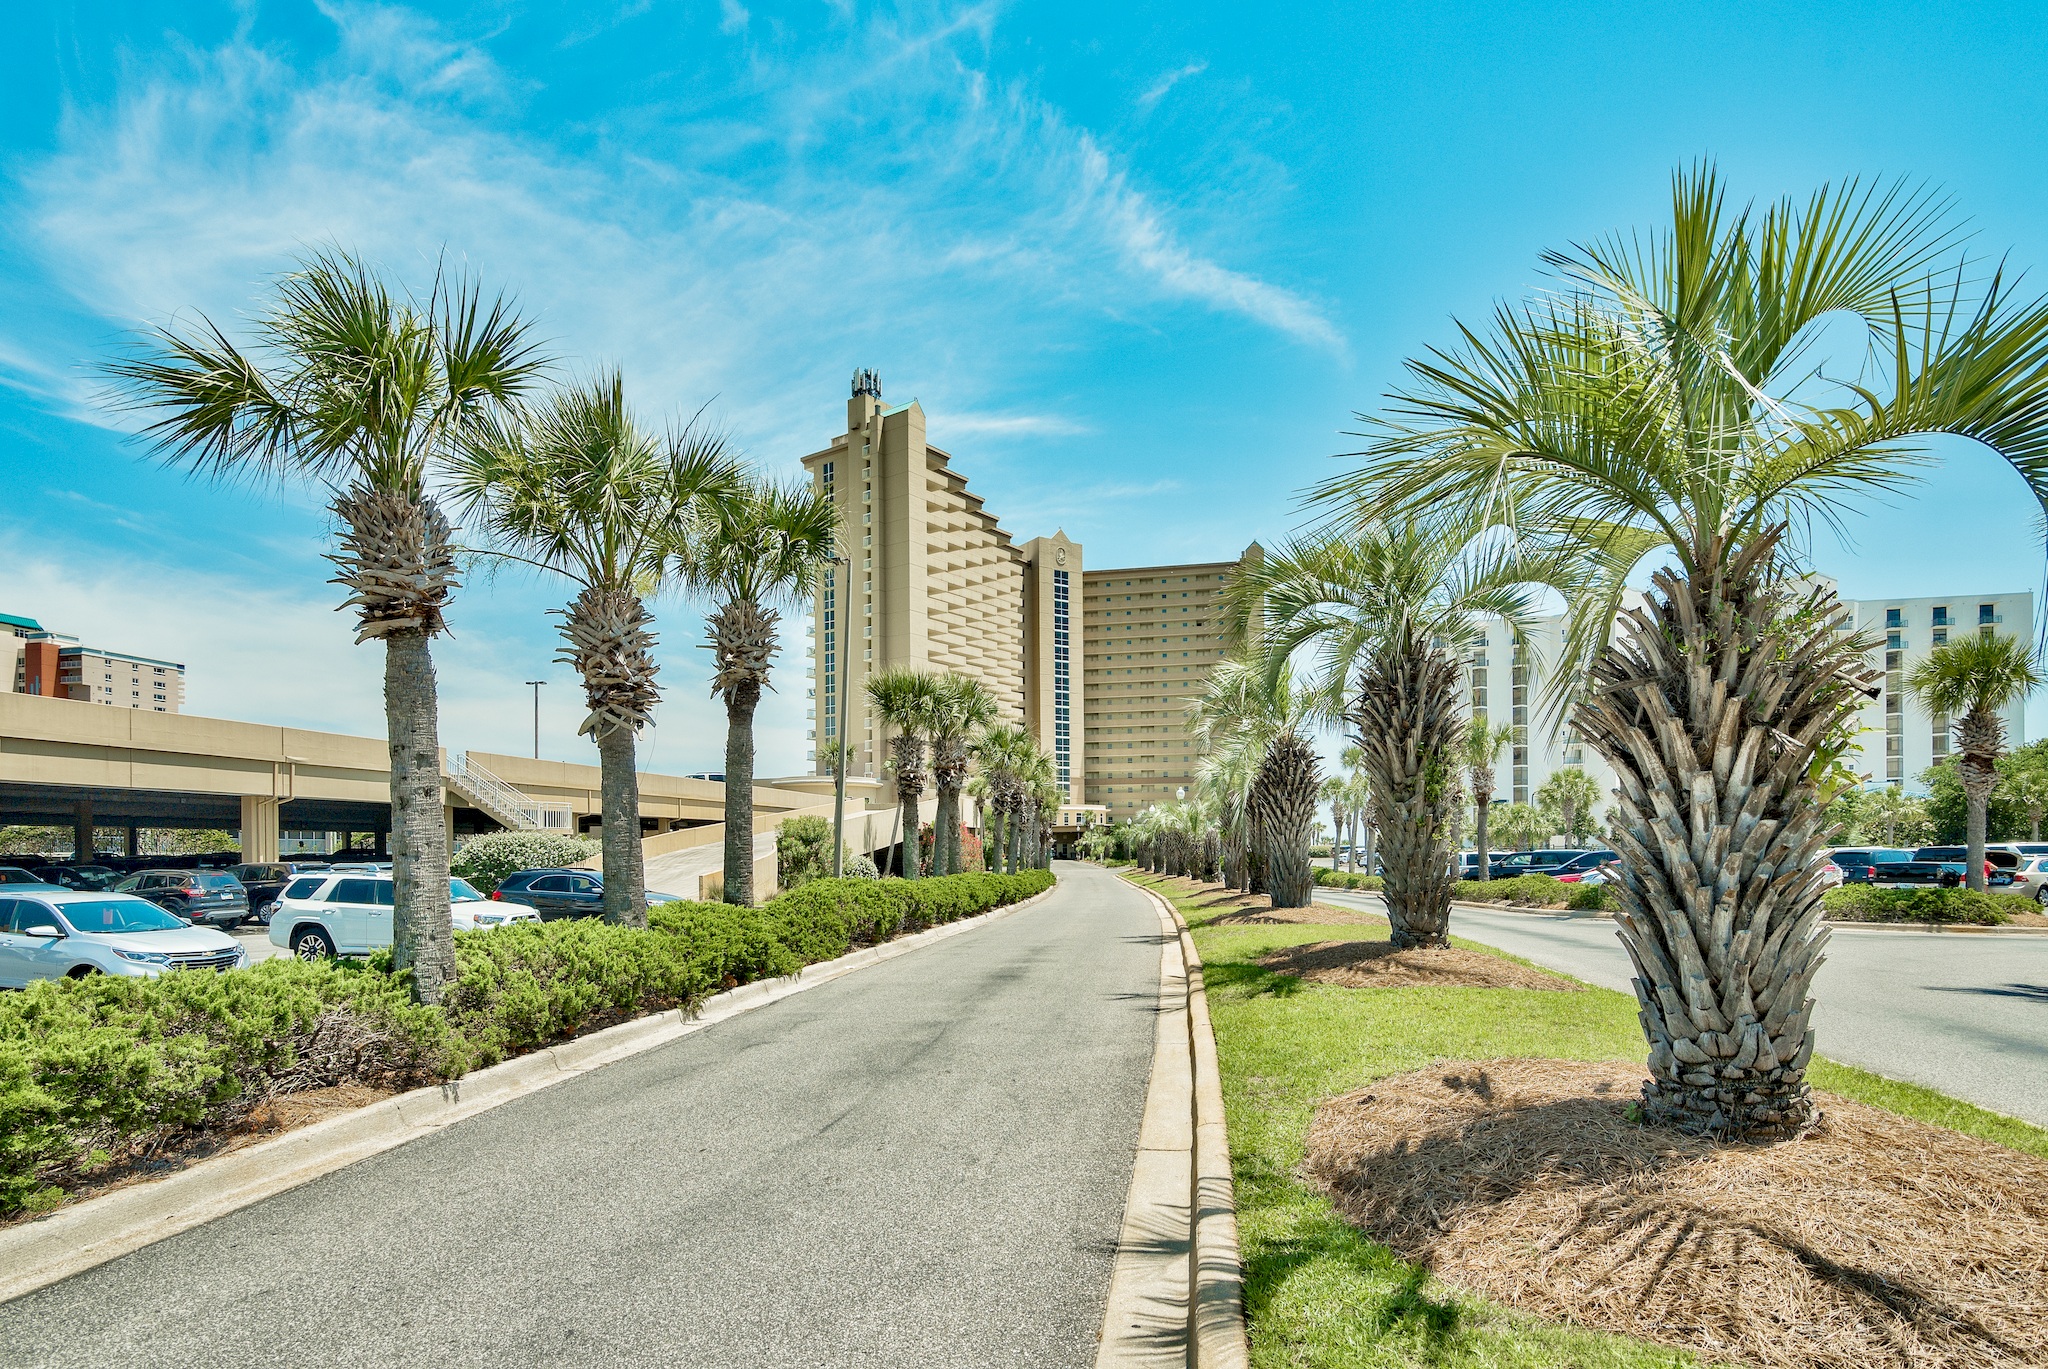 Newly Listed at Pelican Beach Resort!